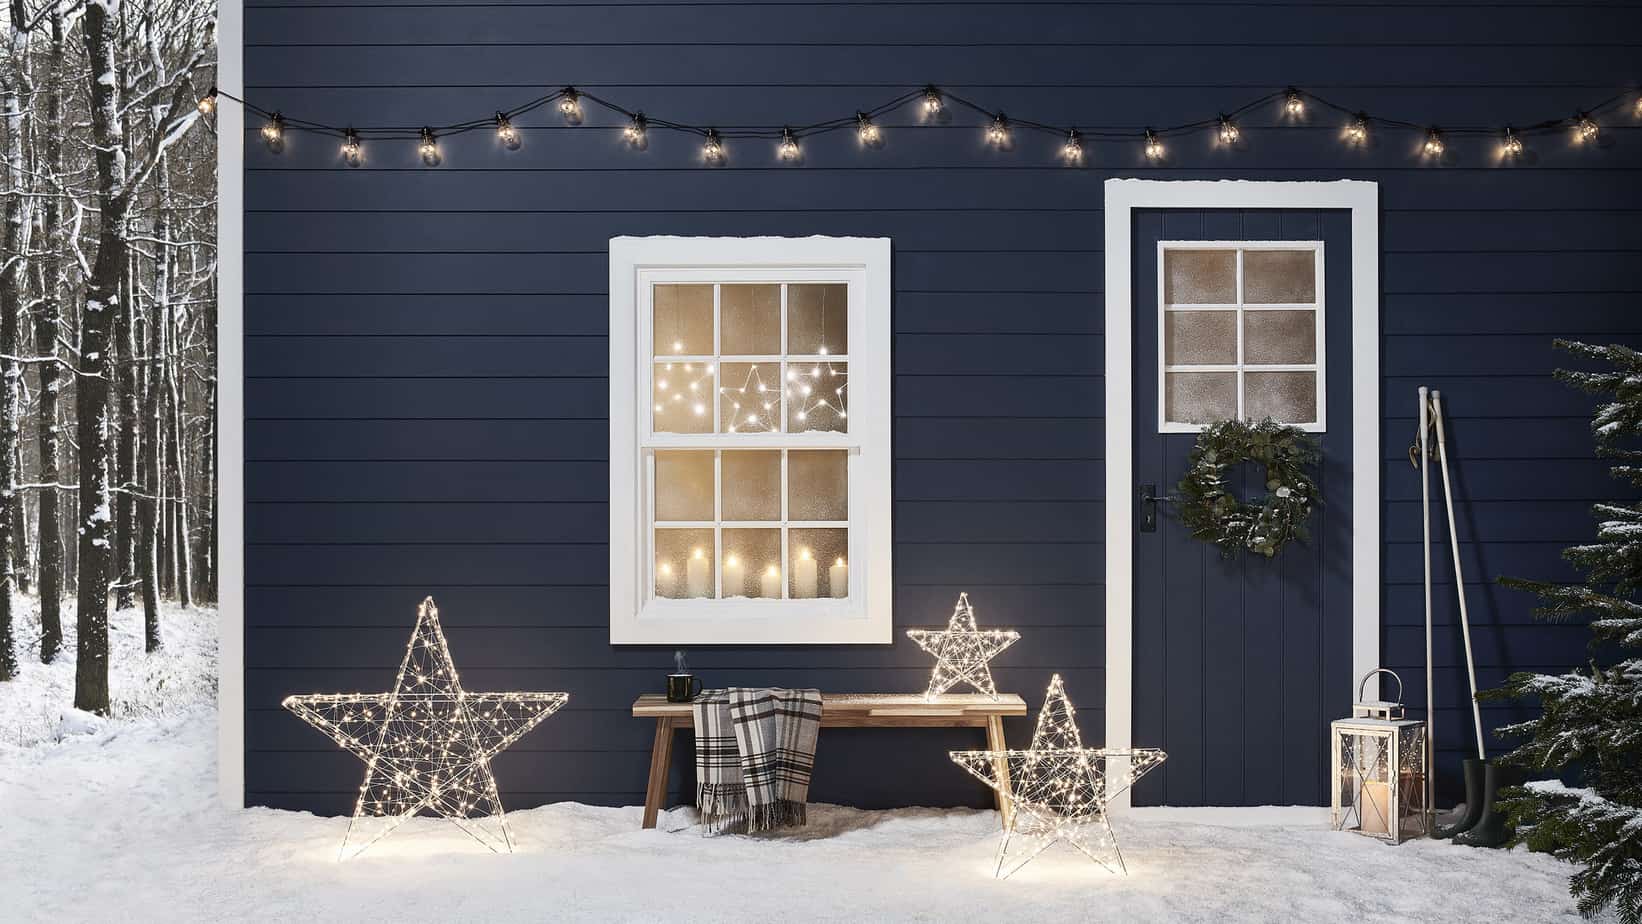 Simple star LEDs in front of a cabin